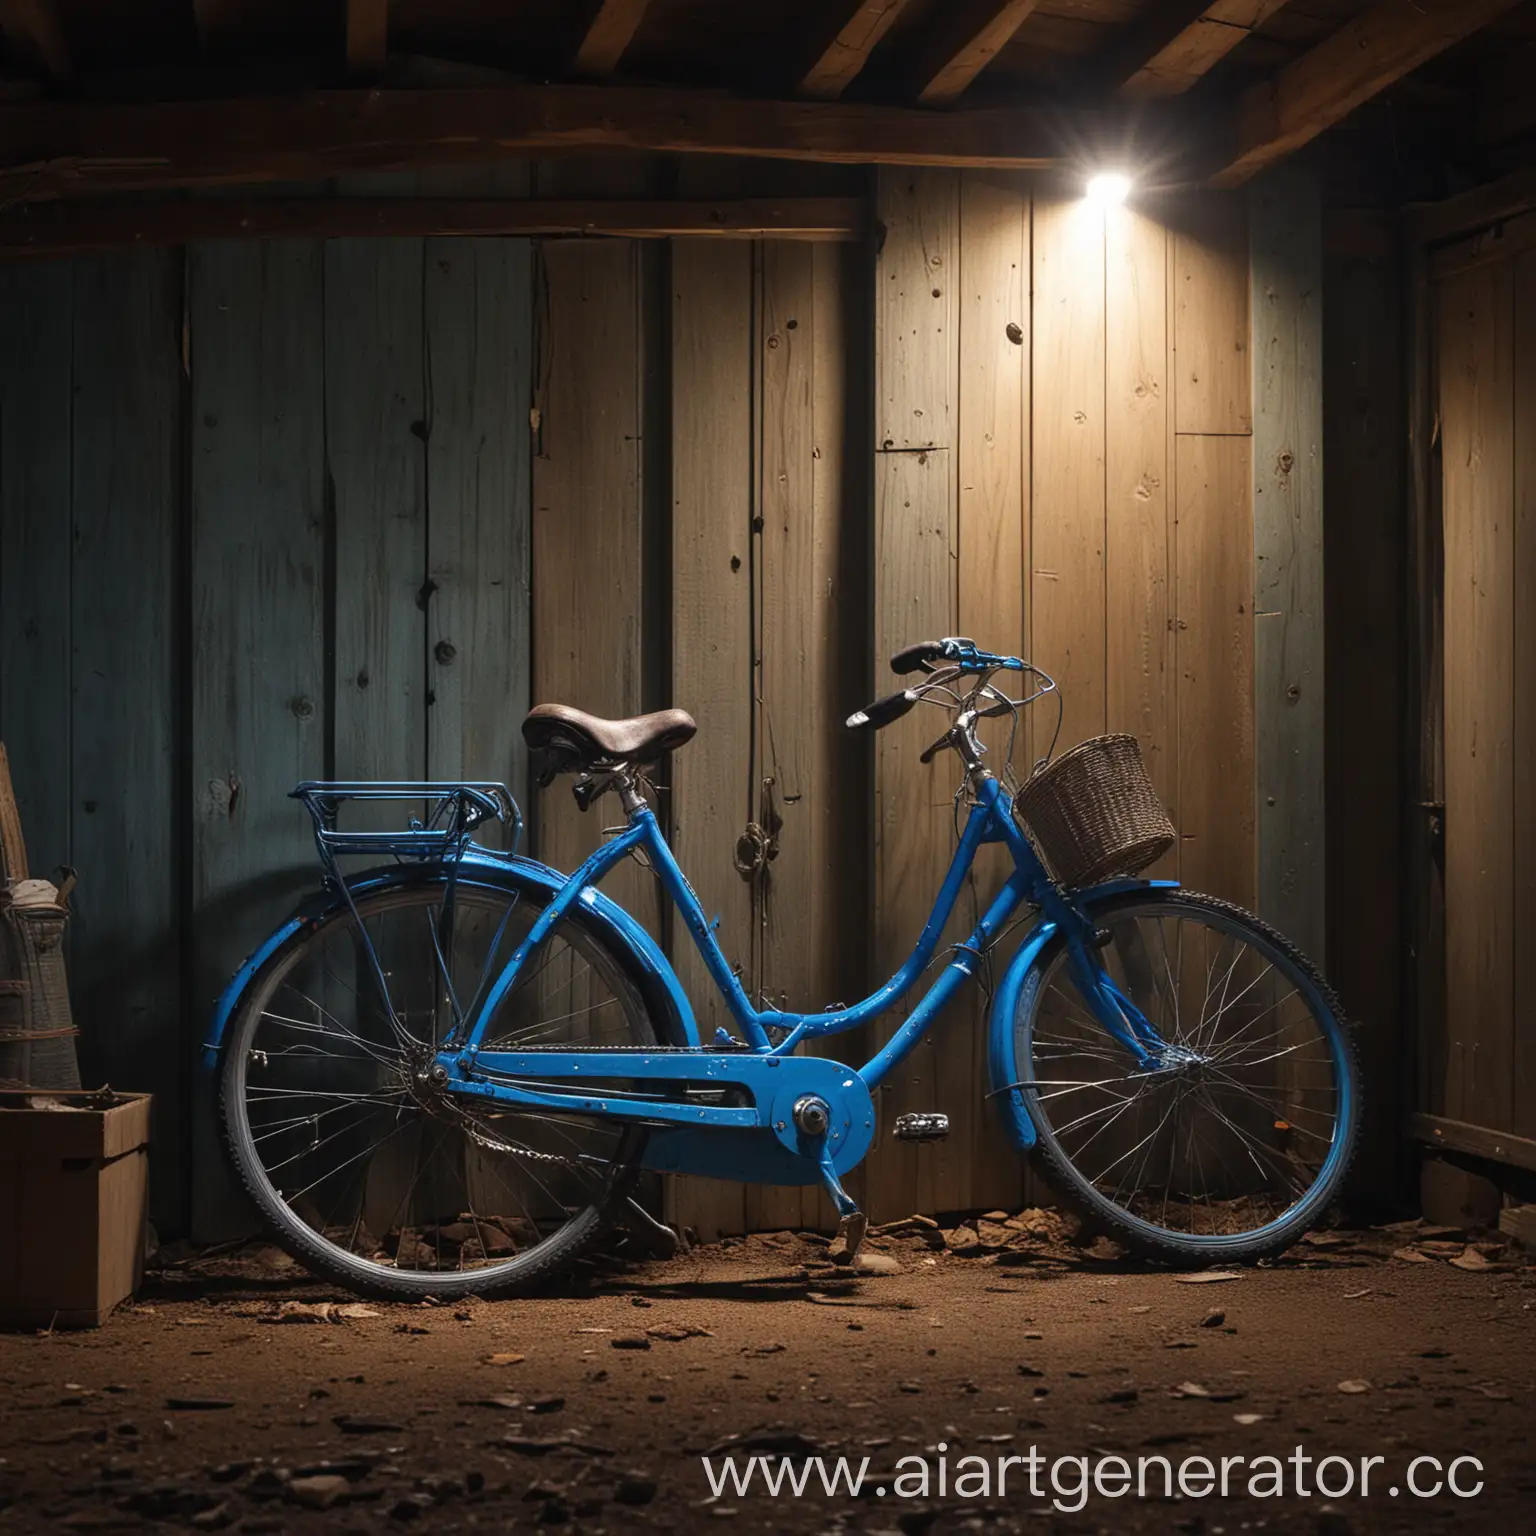 Rustic-Still-Life-Blue-Bicycle-in-Shed-Illuminated-by-Beam-of-Light